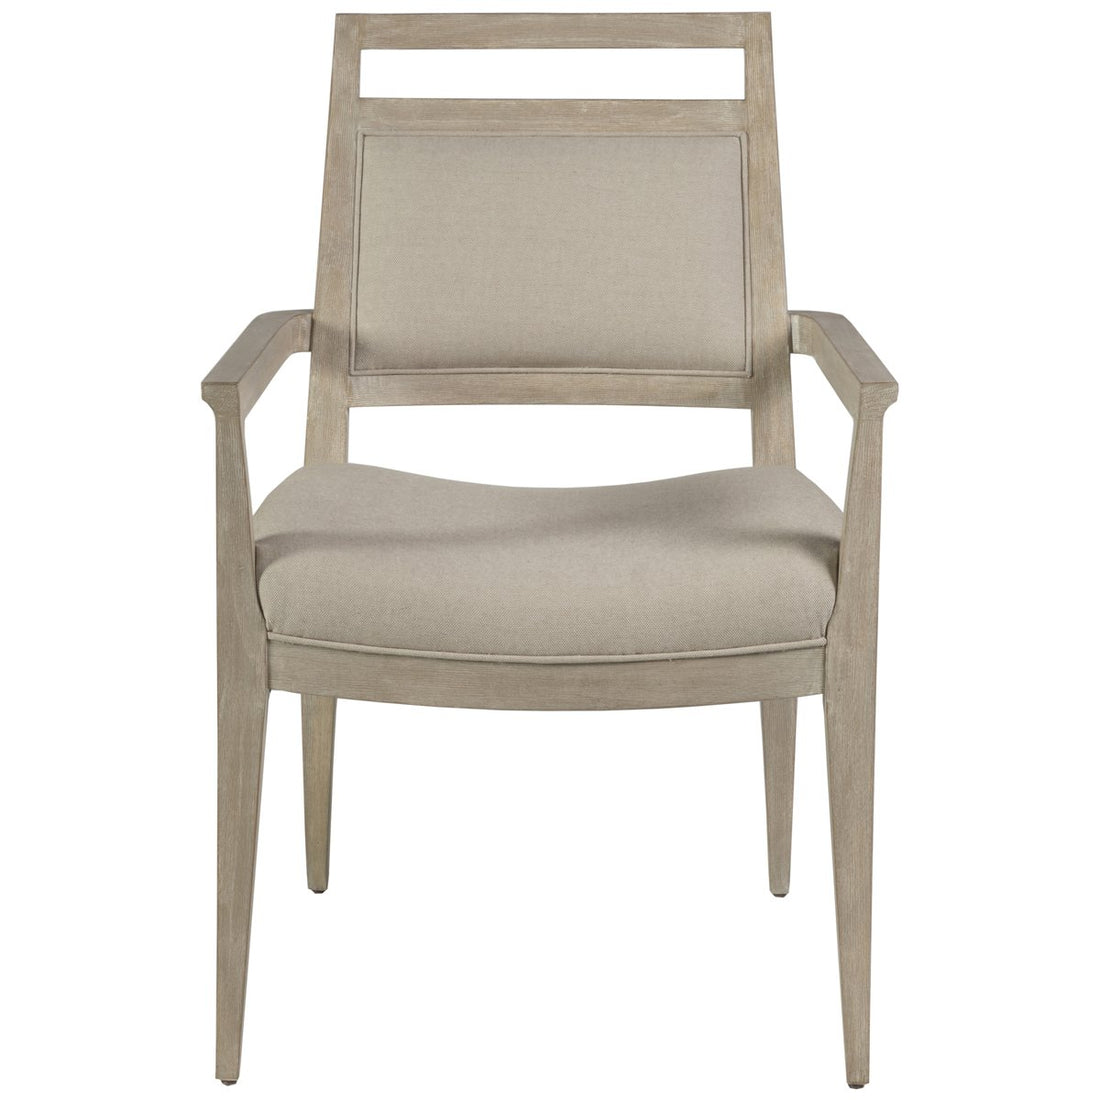 Artistica Home Nico Upholstered Arm Chair 2222-881